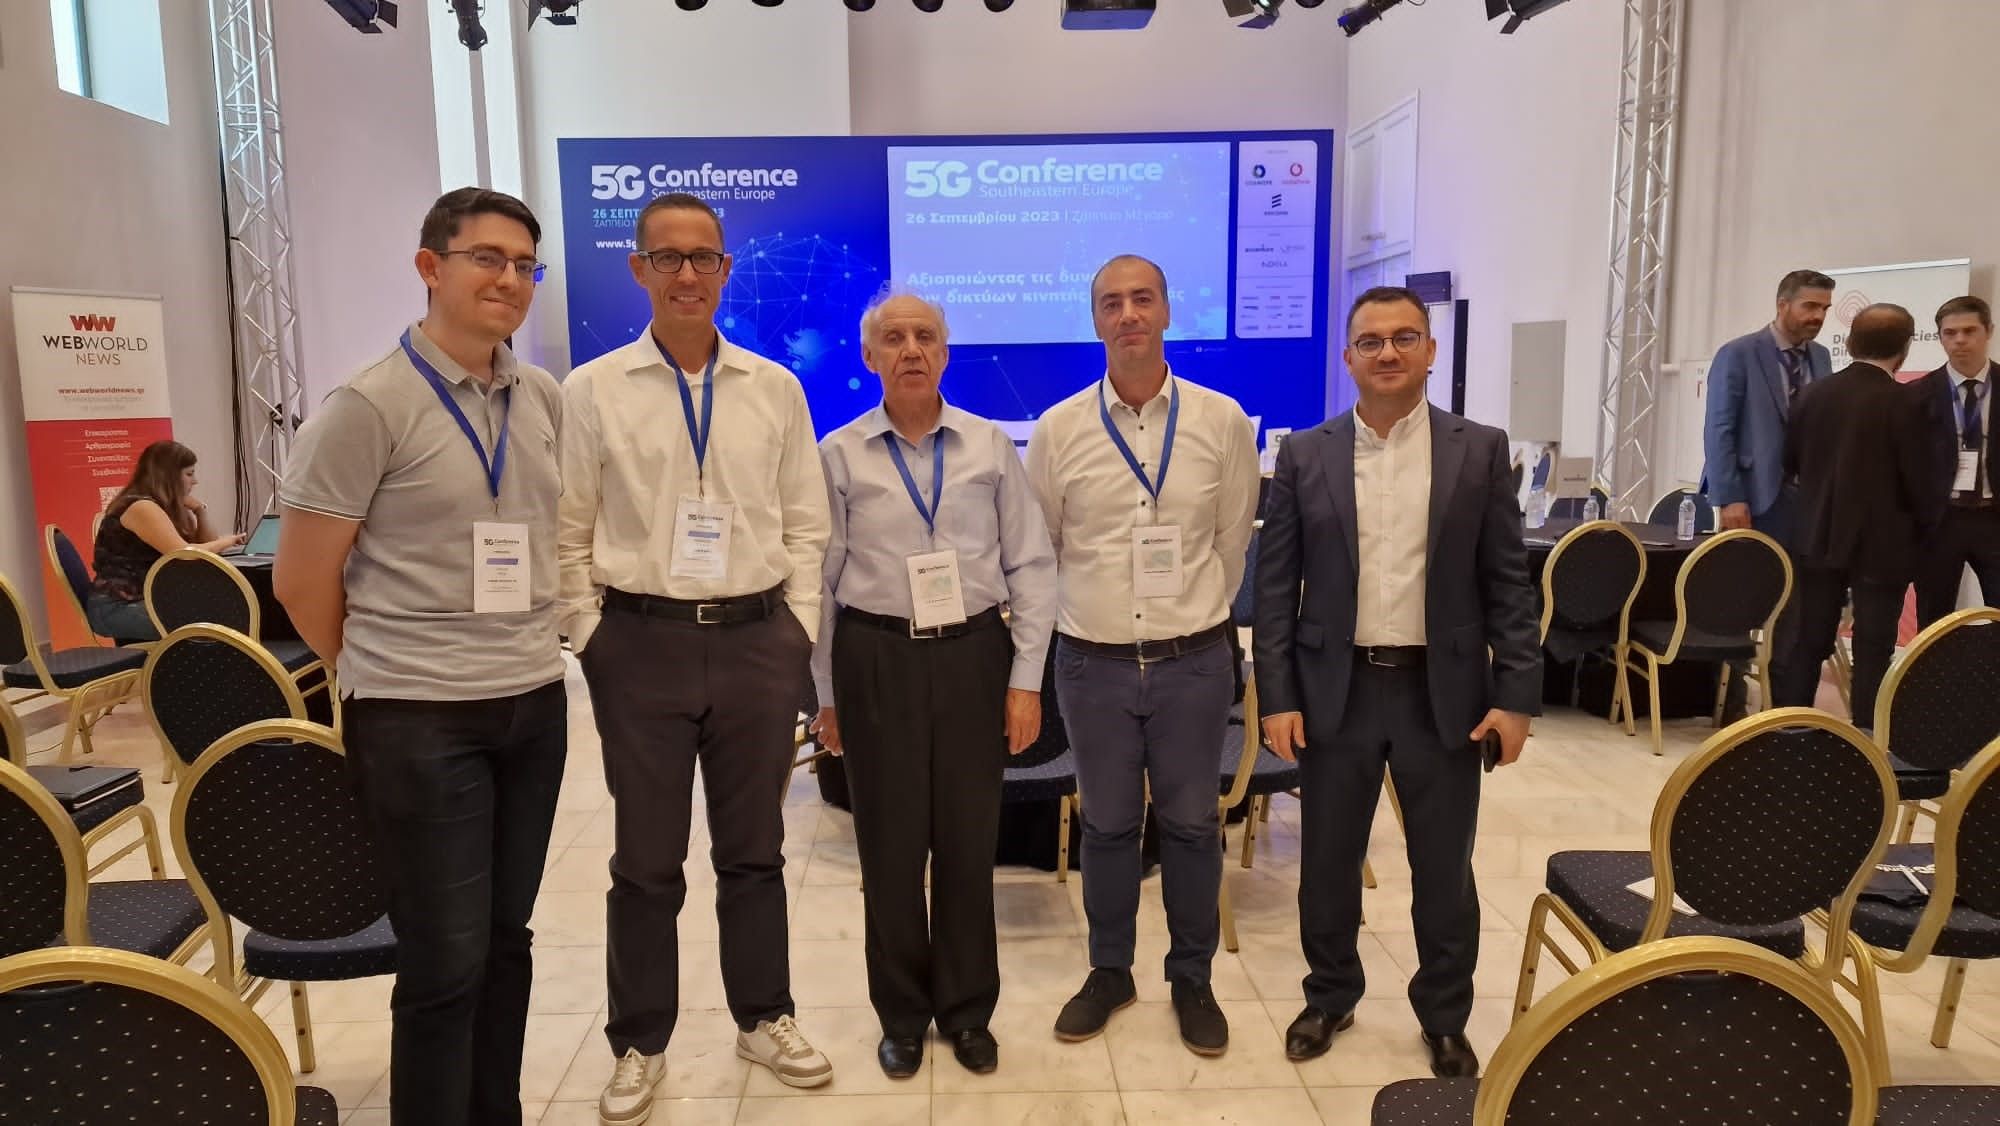 TrialsNet partners in the 5G Conference Southeastern Europe.